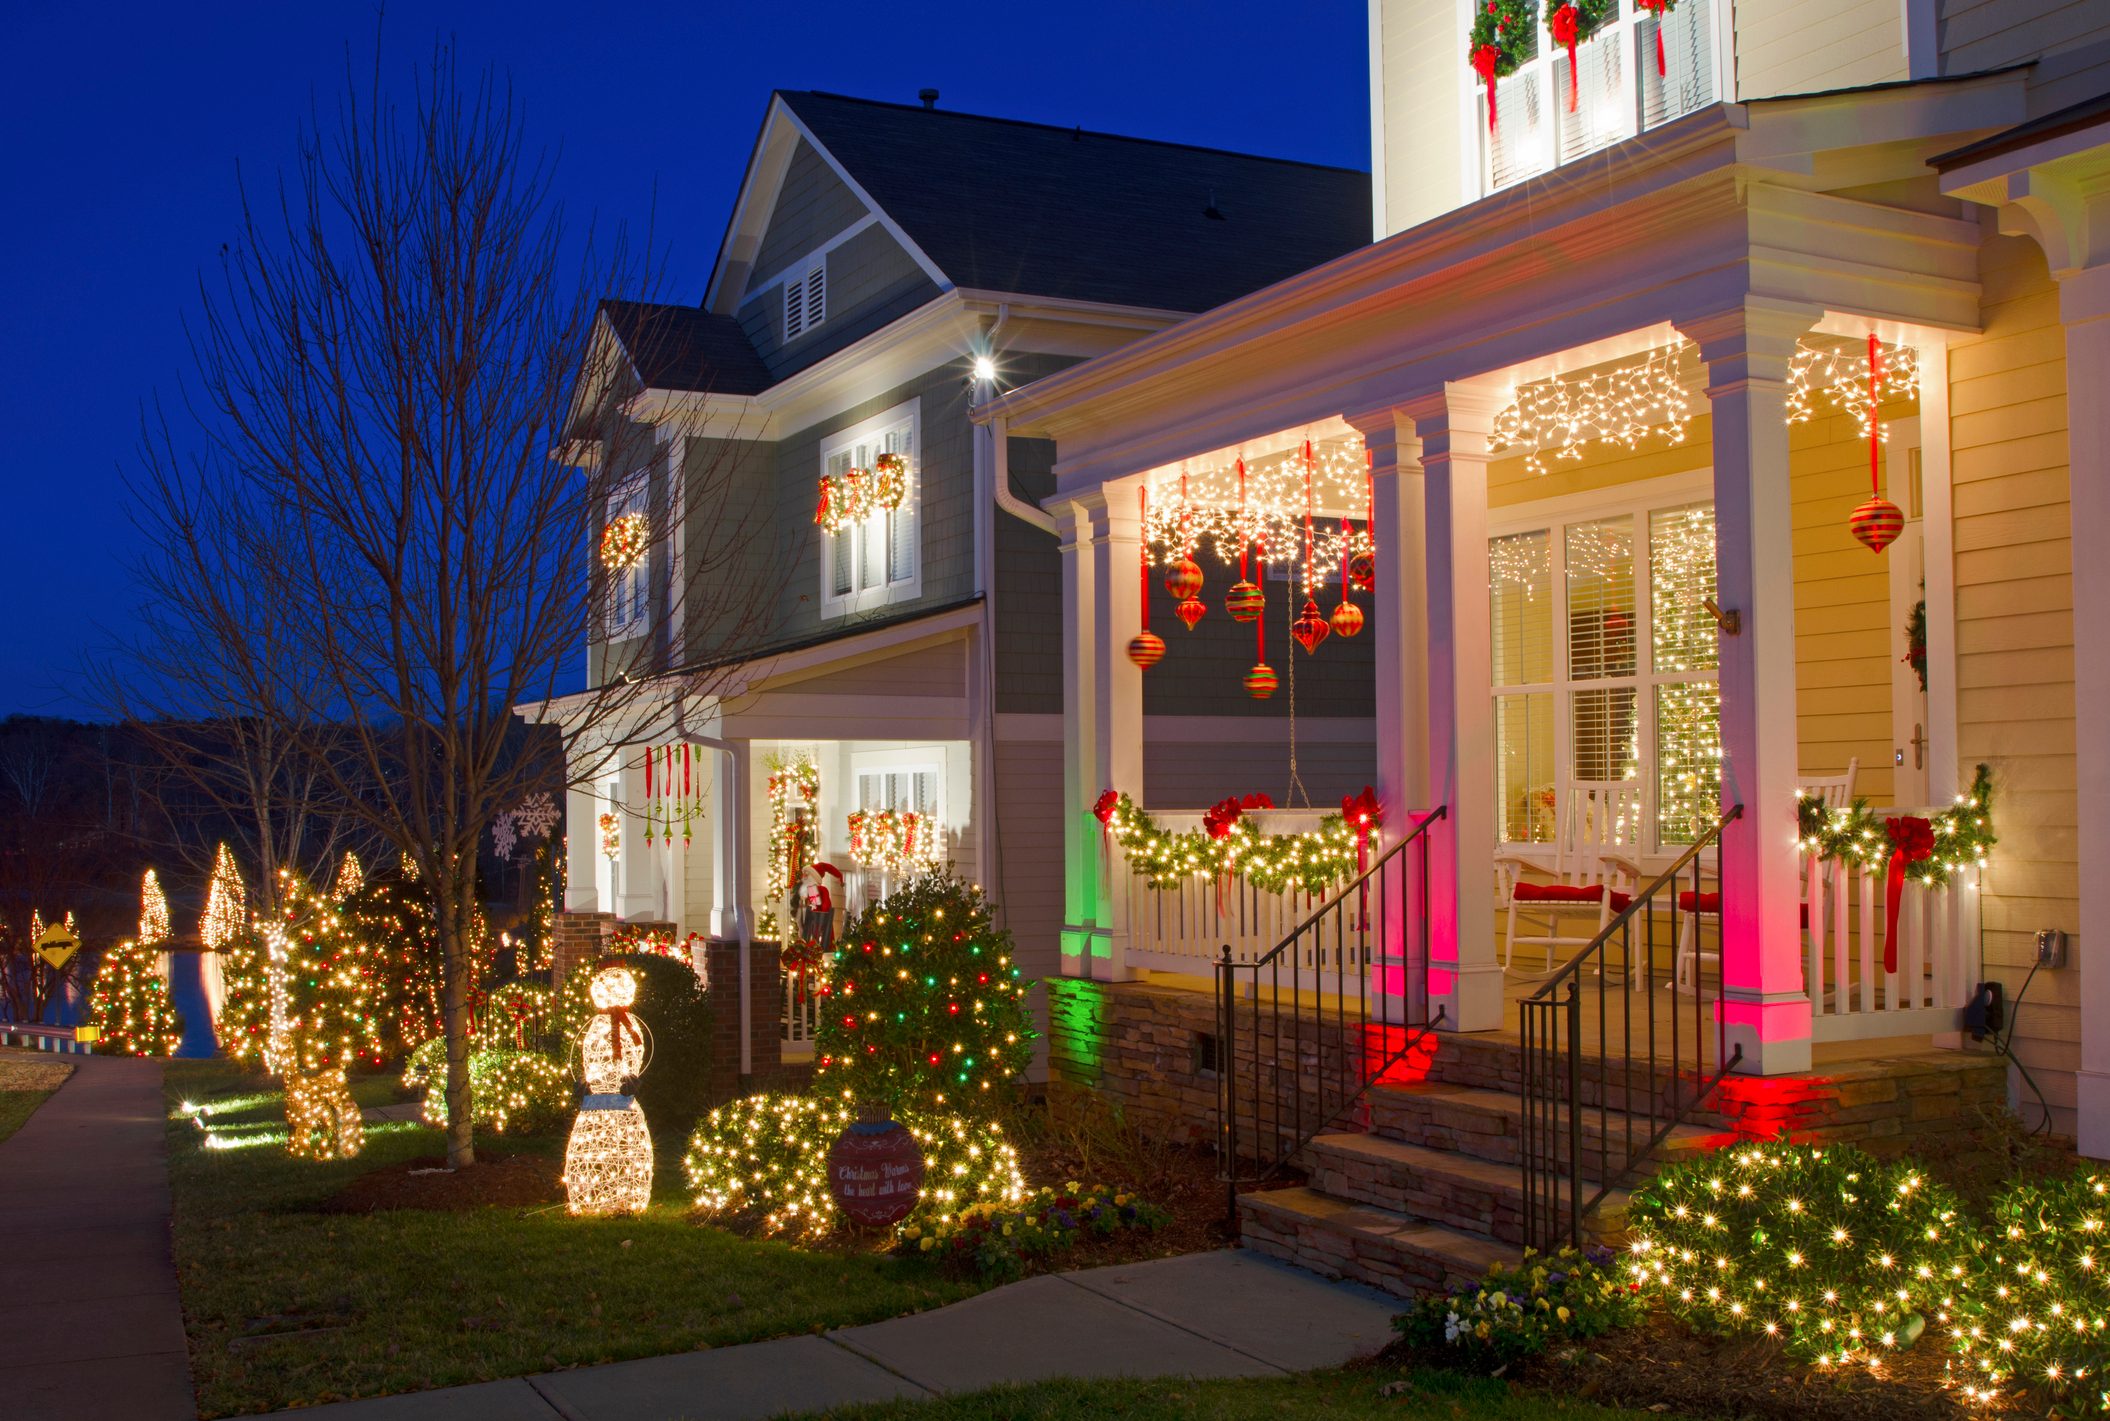 <p><strong>Best for</strong>: Neighborhood Christmas lights</p> <p>One of the <a href="https://www.rd.com/list/best-small-towns-christmas-lights/">best small towns in America for Christmas lights</a>, McAdenville, aka "Christmas Town USA," features 100 decorated homes, plus 265 evergreen trees illuminated with 500,000 colored lights. The town gets 600,000 visitors in December to see the lights by car and on foot, as some roads are closed off to traffic. One lucky elementary student is chosen to flip the switch at the start of the season; then the luminaries go on nightly throughout the month. Visitors can also enjoy the Yule Log Ceremony and the Annual Christmas Town Festival.</p> <p>After your excursion to McAdenville, drive a few minutes down the road to the charming town of Gastonia and the revamped Esquire Hotel, in a 1918 bank that eventually housed lawyer's offices—hence the next of its eatery, Barrister's Restaurant. The boutique hotel's decor is top-notch, and be sure to check out the cool rooftop lounge.</p> <p class="listicle-page__cta-button-shop"><a class="shop-btn" href="https://www.tripadvisor.com/Hotel_Review-g49156-d17764434-Reviews-The_Esquire_Hotel_An_Ascend_Hotel_Collection_Member-Gastonia_North_Carolina.html">Book Now</a></p>